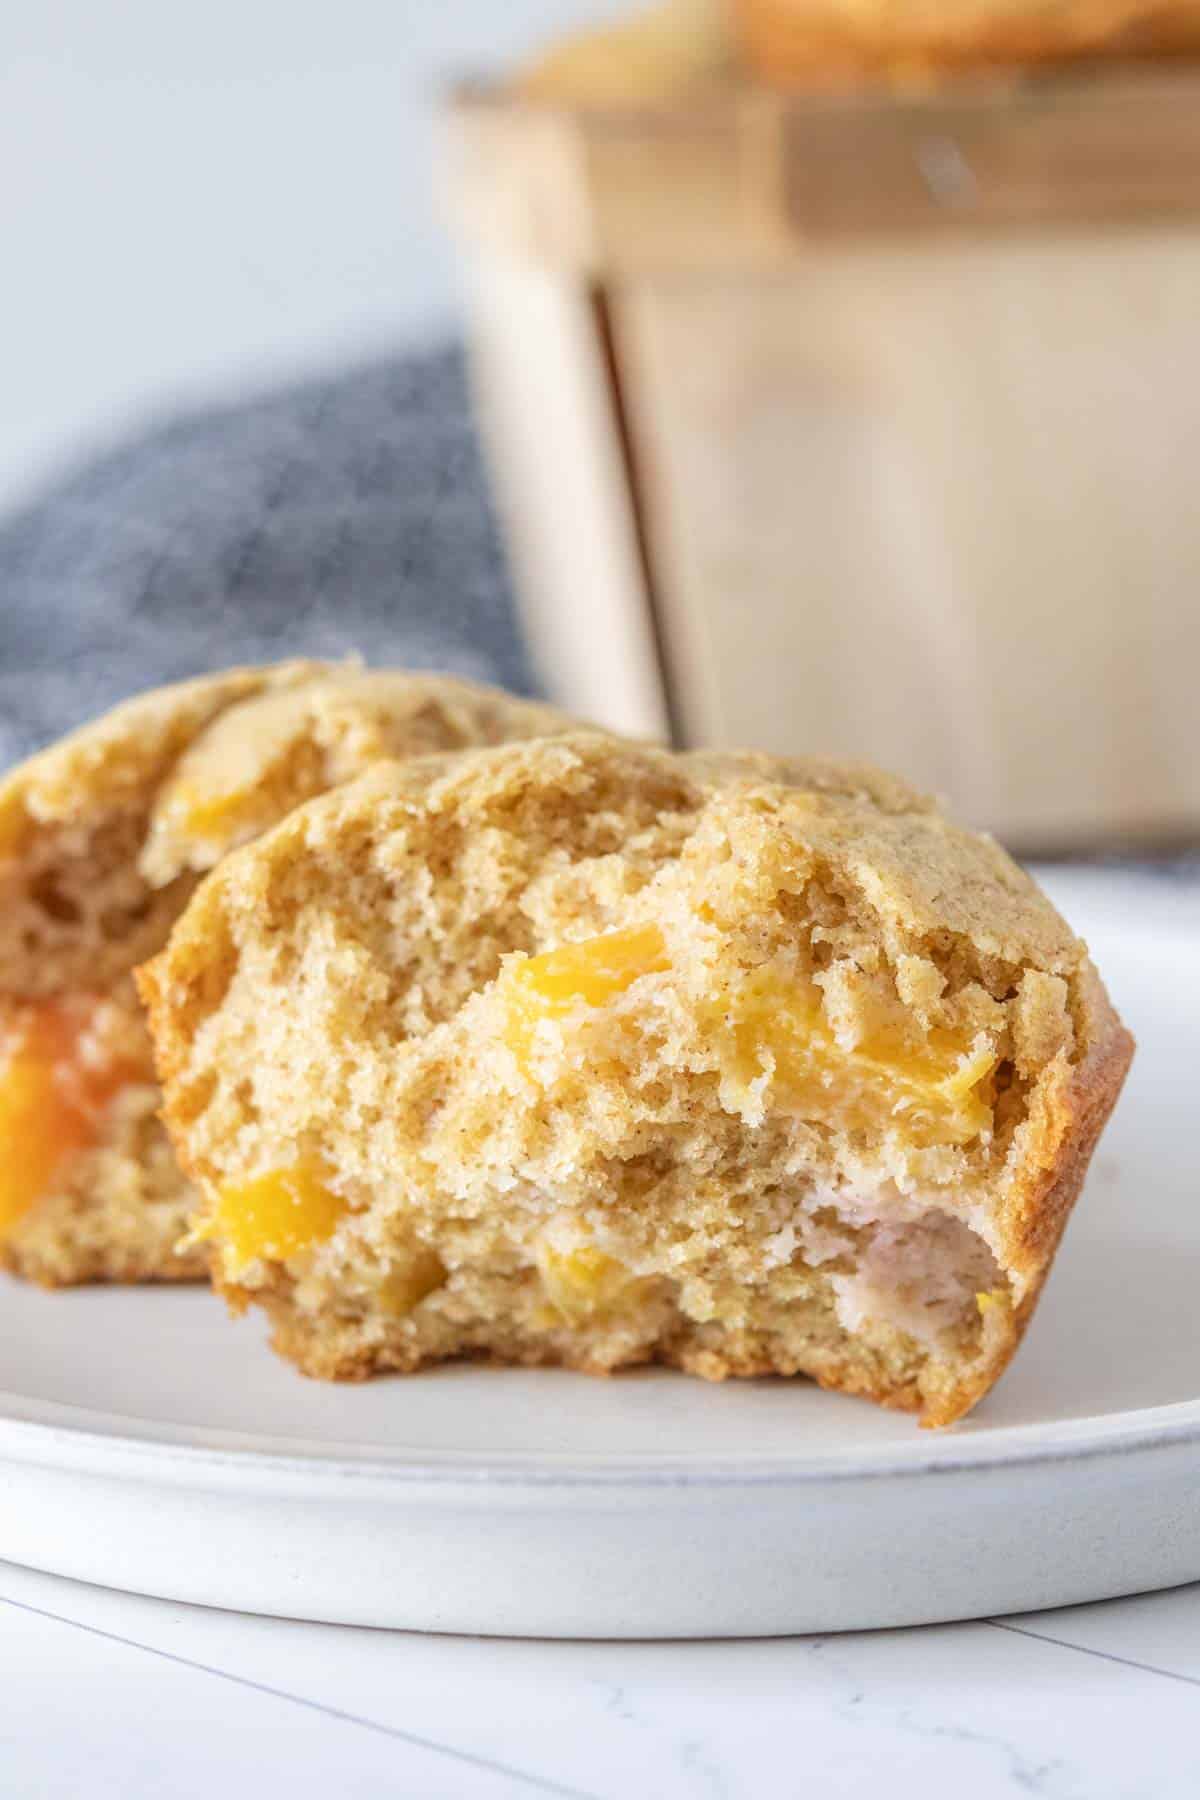 Peach muffin broken into two halves to see the interior.